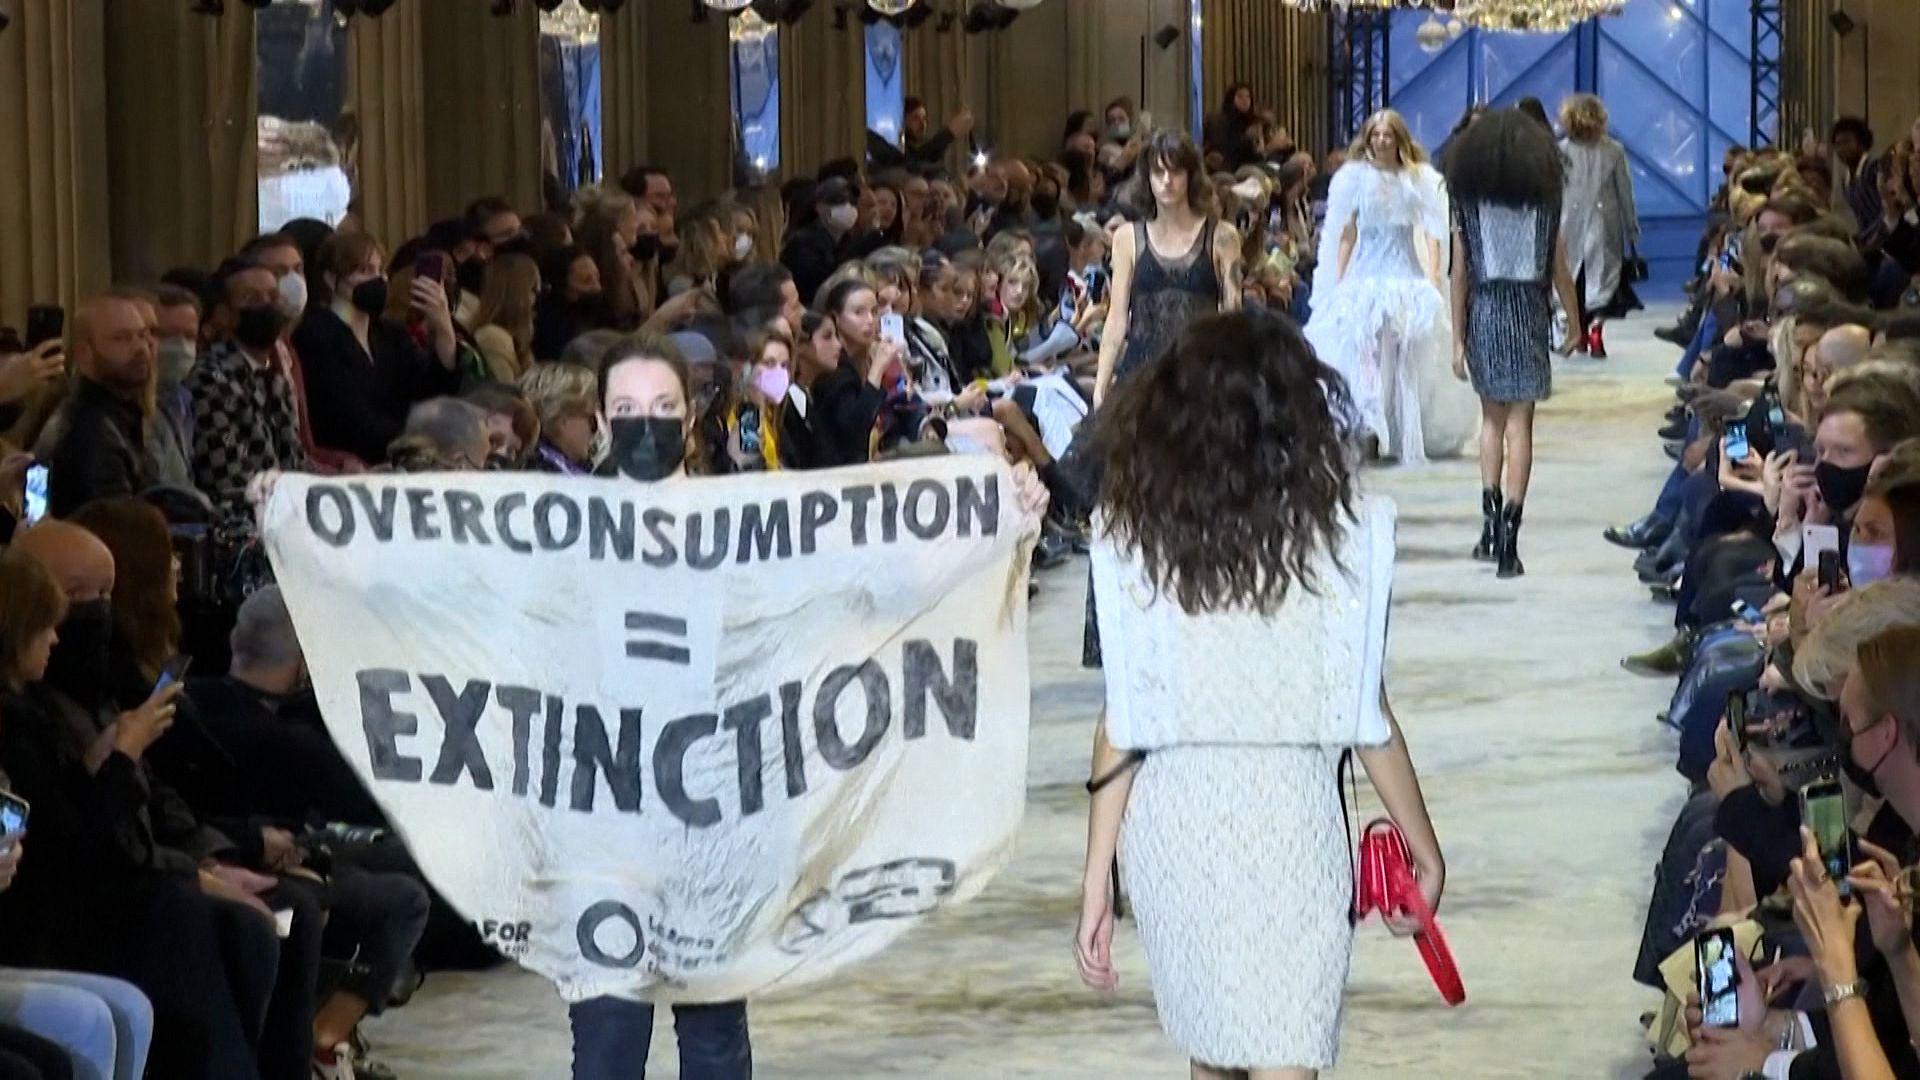 Louis Vuitton Runway Protest: Does It Mean Anything?